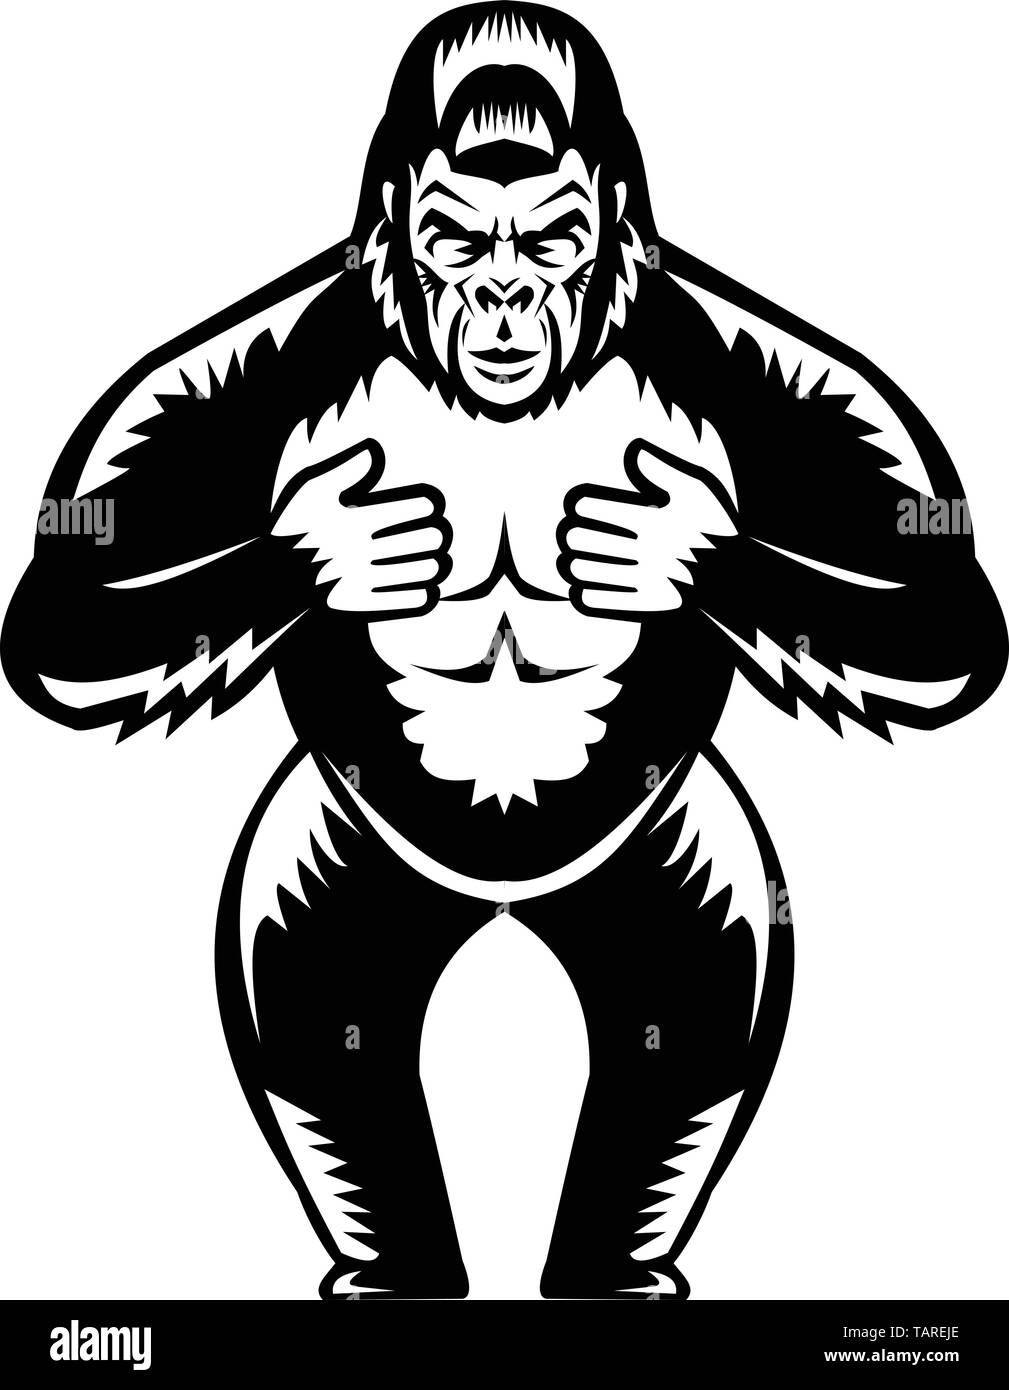 Retro woodcut style illustration of a silverback gorilla  thumping or beating it's chest viewed from front on isolated background done in black and wh Stock Vector